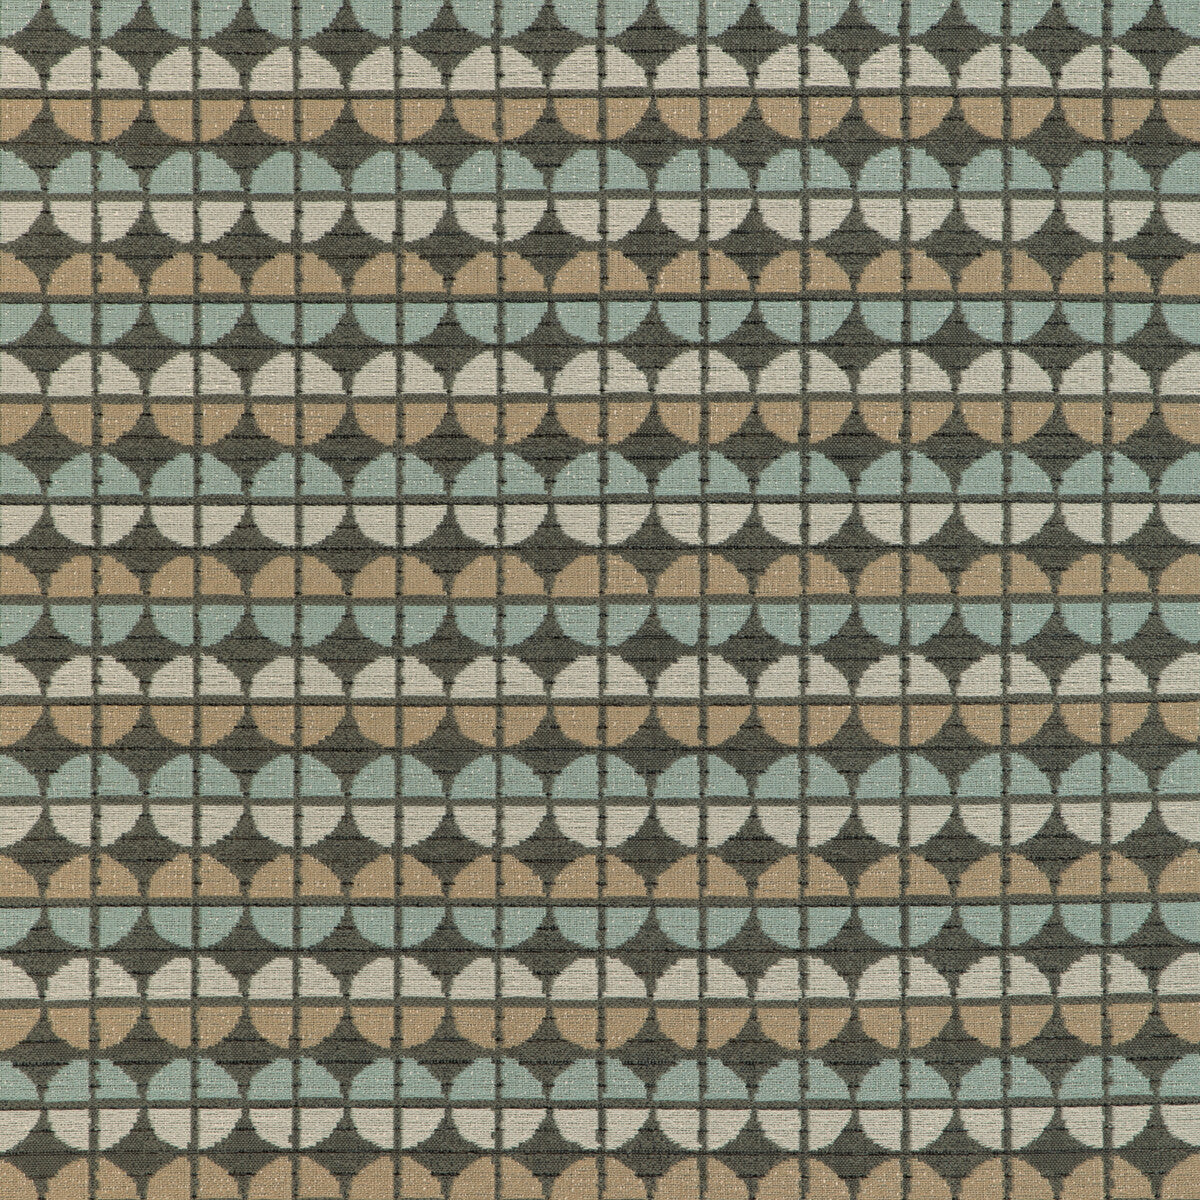 Decoy fabric in mineral color - pattern 37051.615.0 - by Kravet Contract in the Chesapeake collection